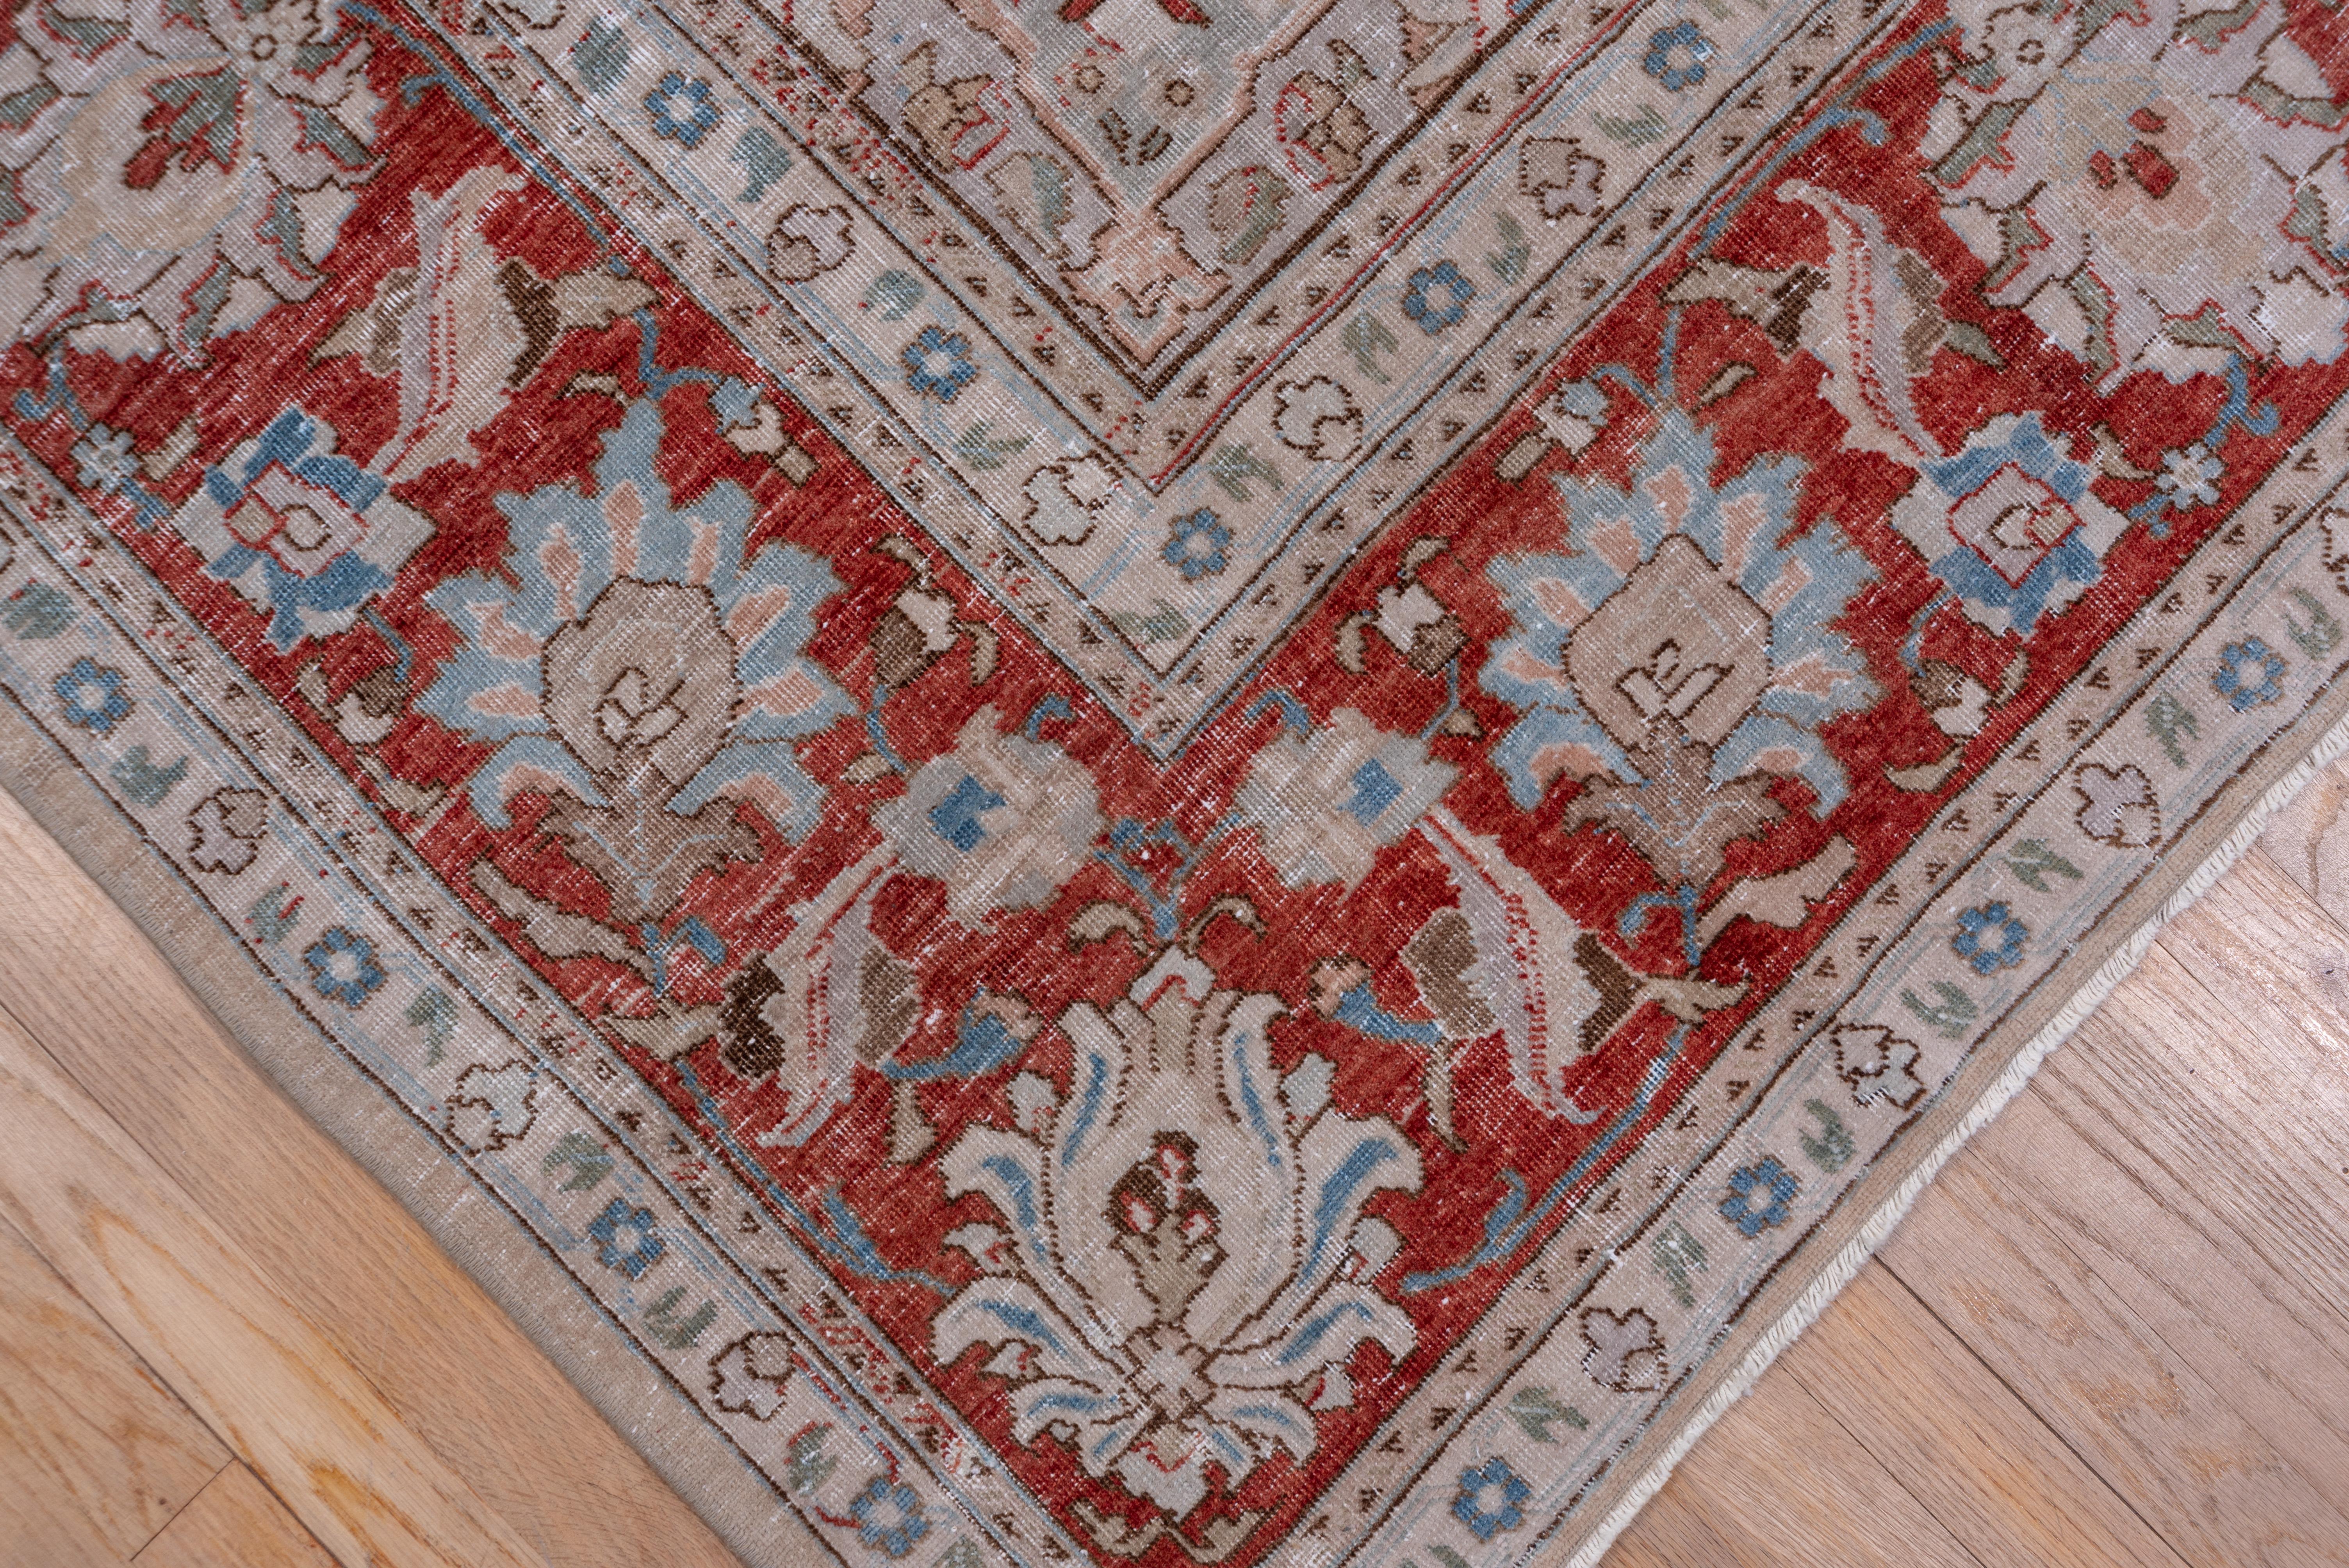 Mid-20th Century Eliko Rug by David Ariel Persian Tabriz Rug, Grey Subfield and Red Borders For Sale